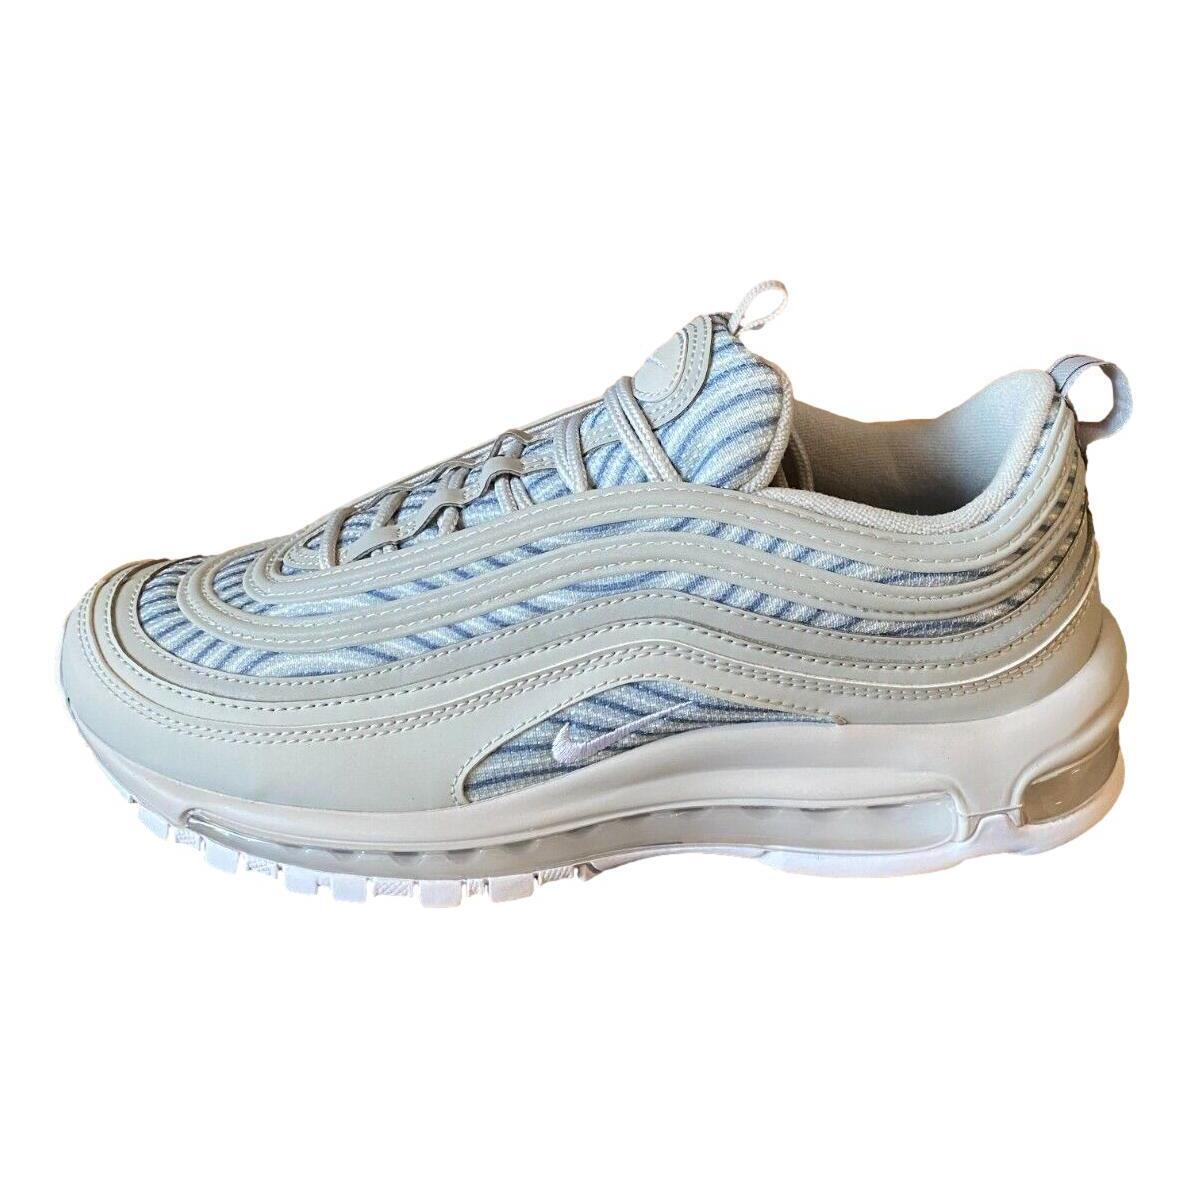 Nike ID By You Women`s Air Max 97 Shoes Sneakers Grey/blue DJ3180-991 - Grey/Blue